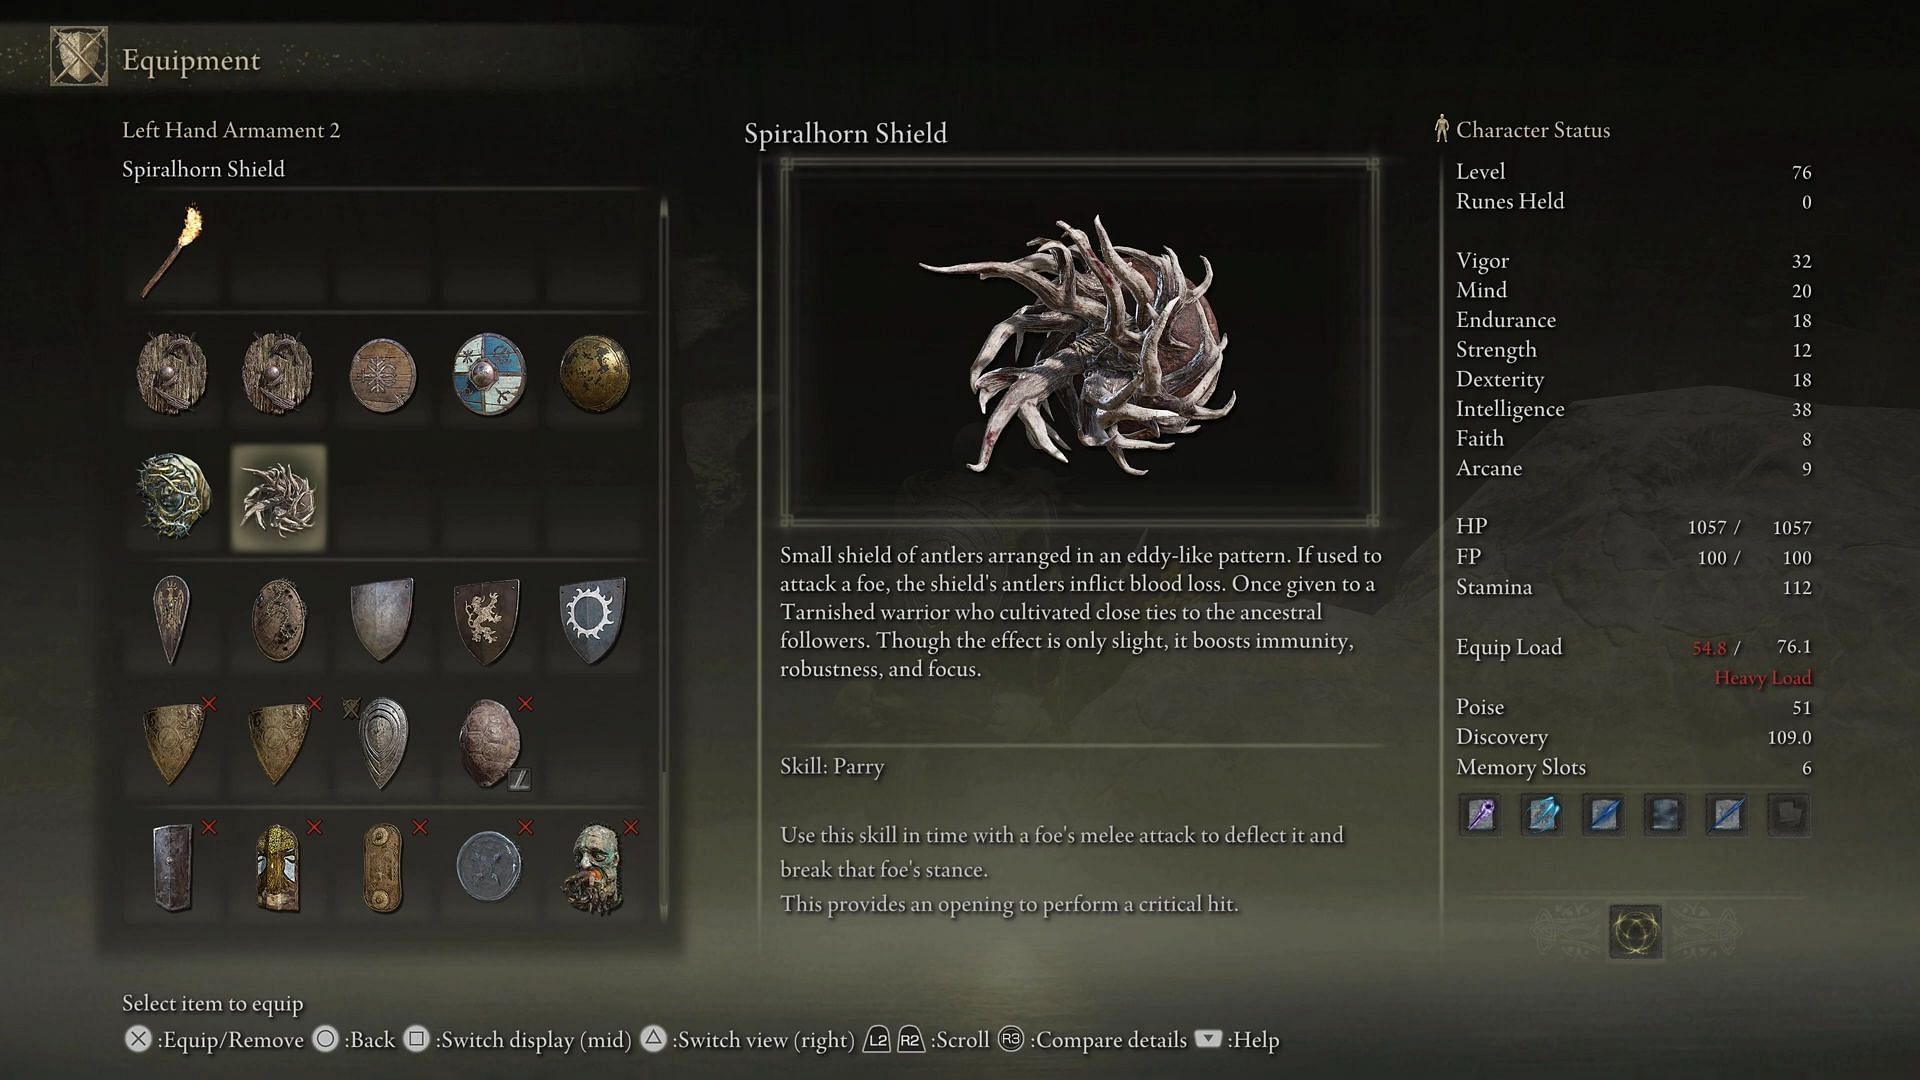 The Spiralhorn Shield lacks guard, but works very well for parry purposes (Image via EternityInGaming/Youtube)